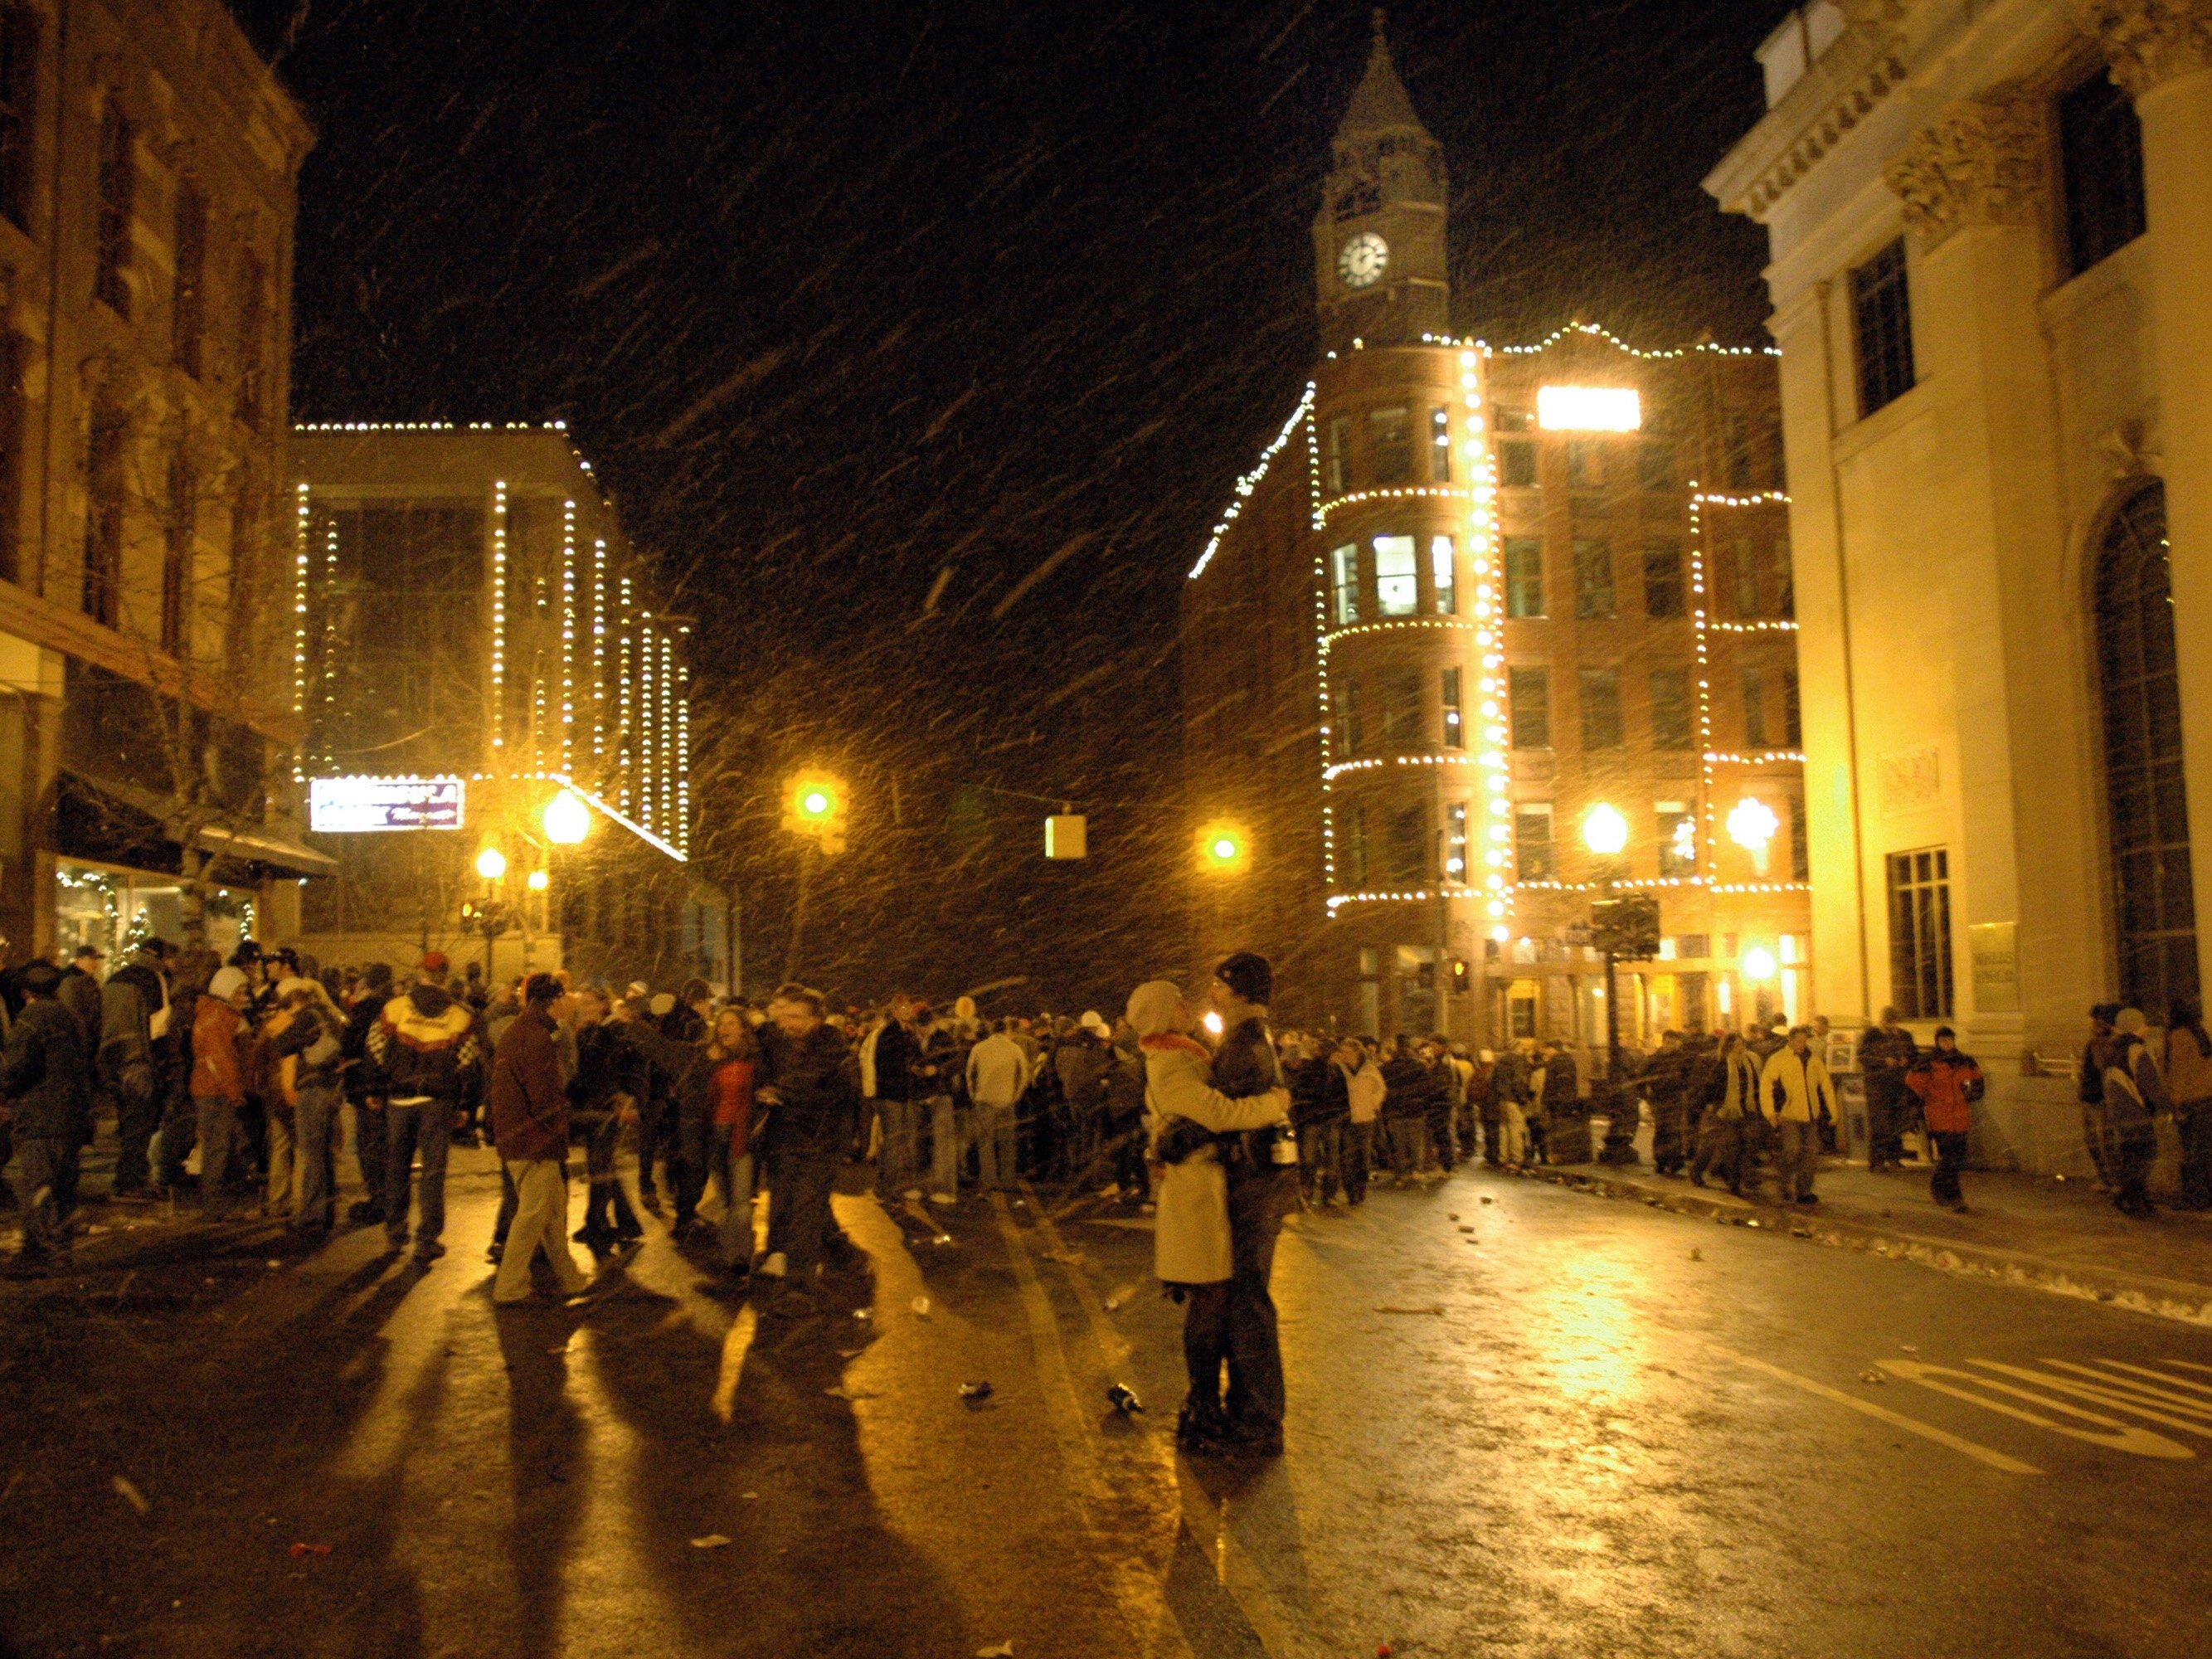 A New Year's celebration captured in Marquette.